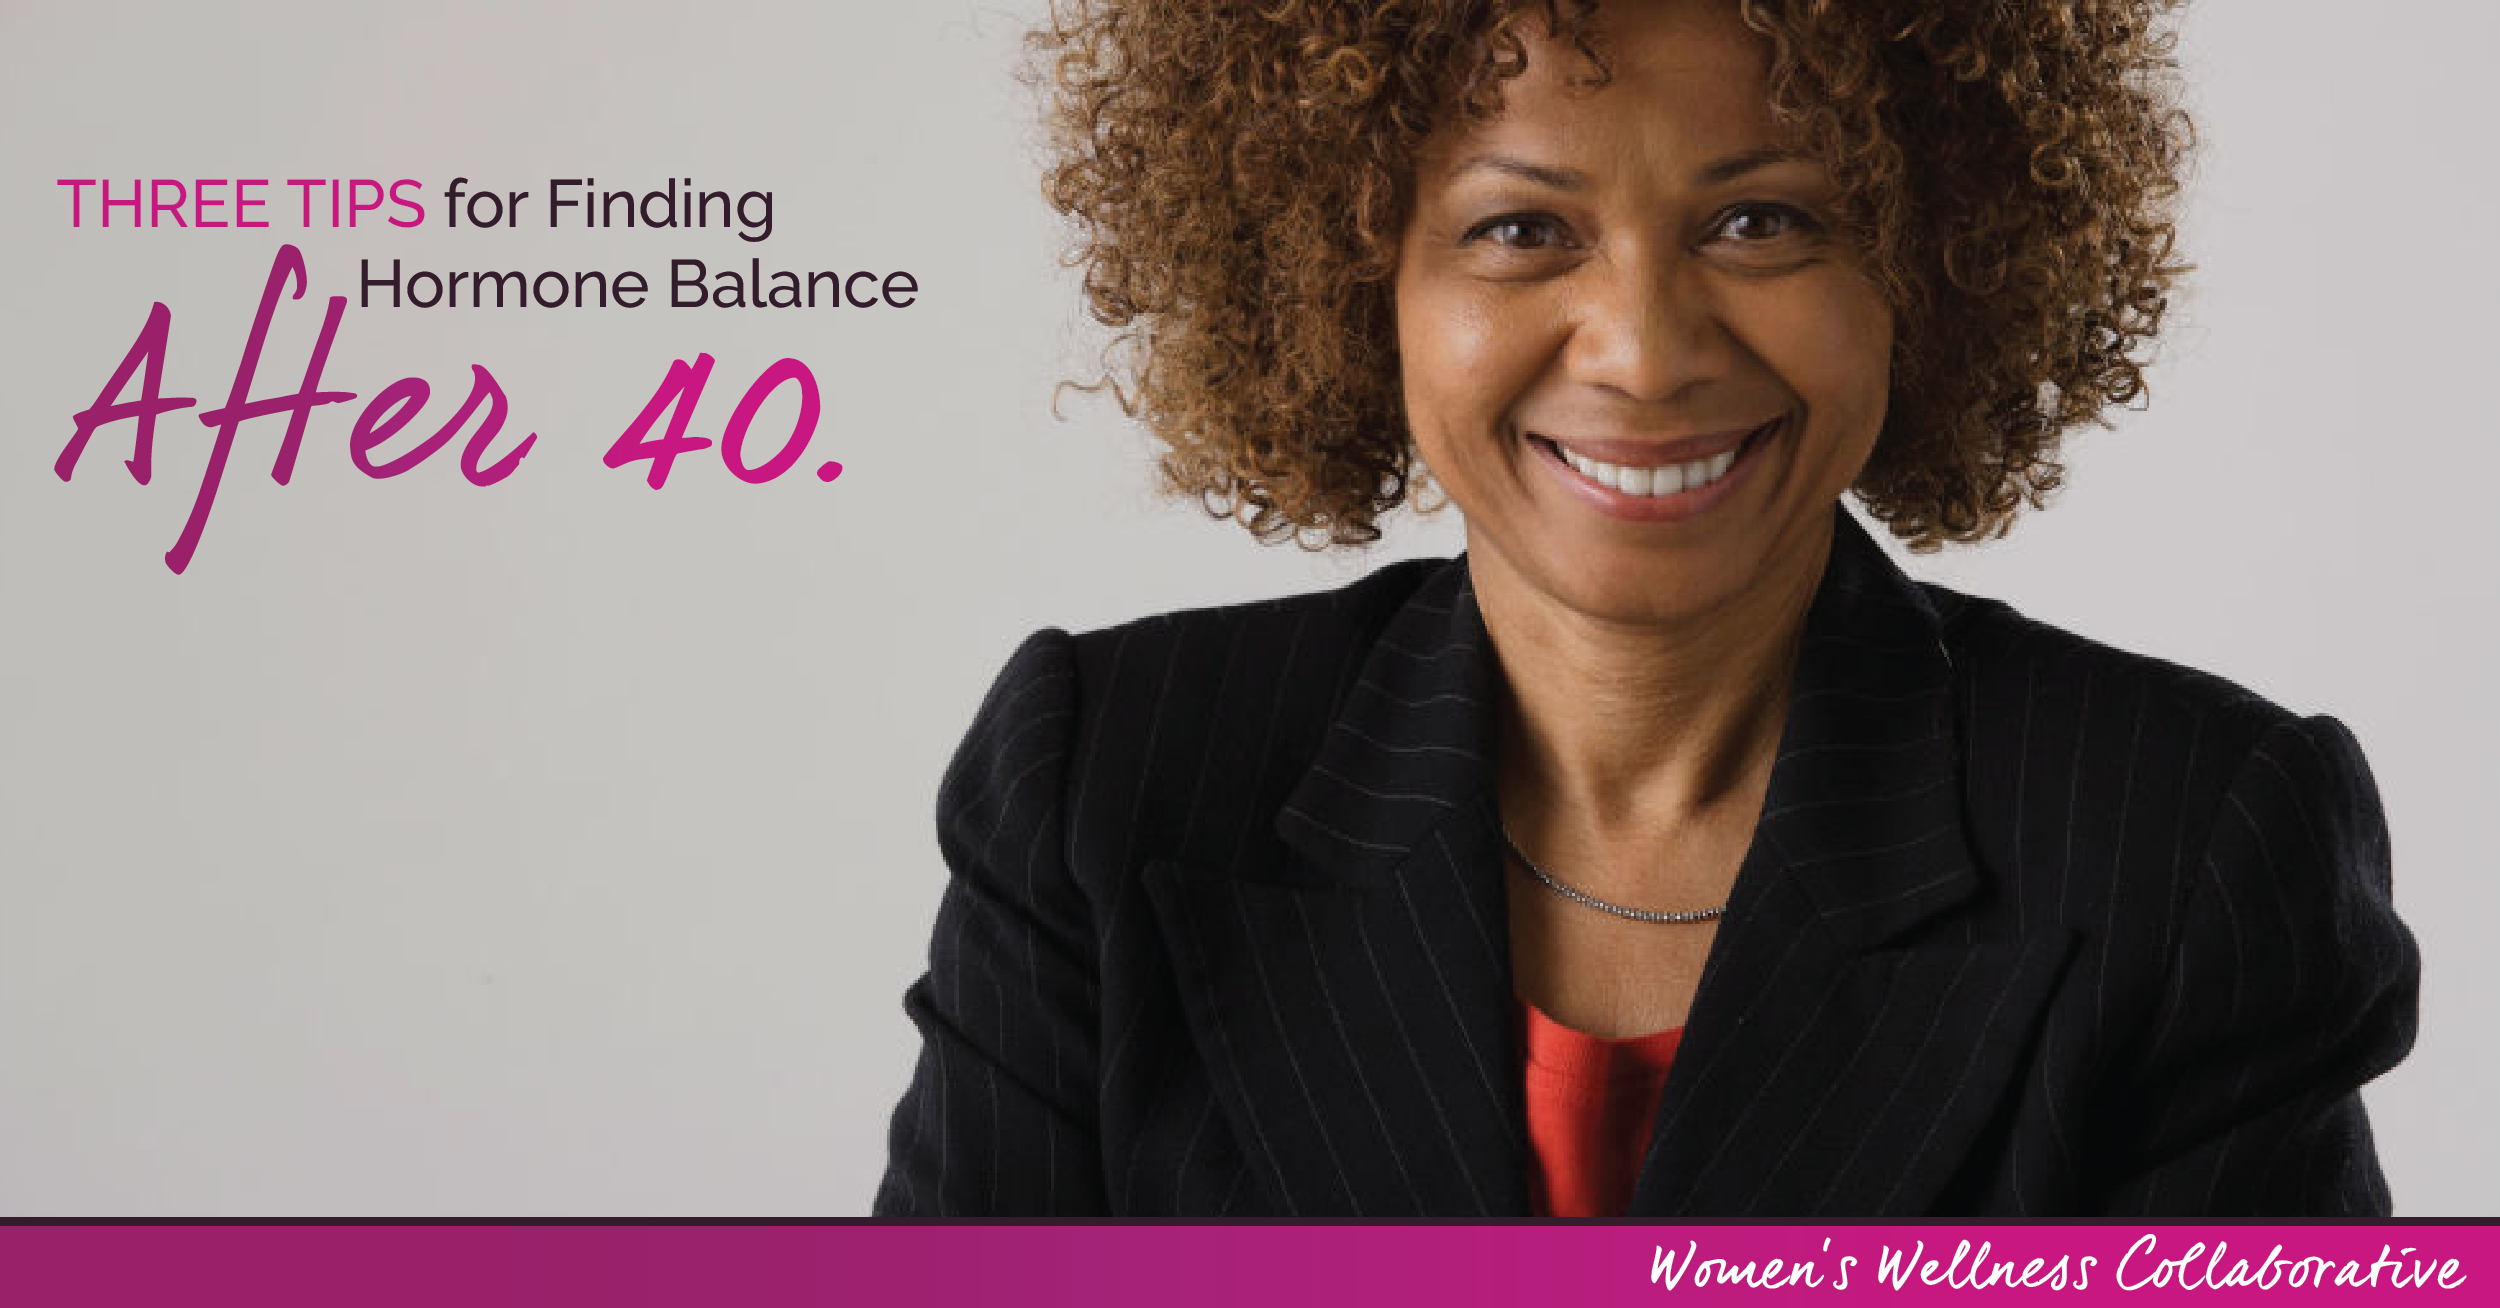 3 Tips for Hormone Balance After 40: a few lifestyle changes can make peri-menopause and menopause a bit easier.